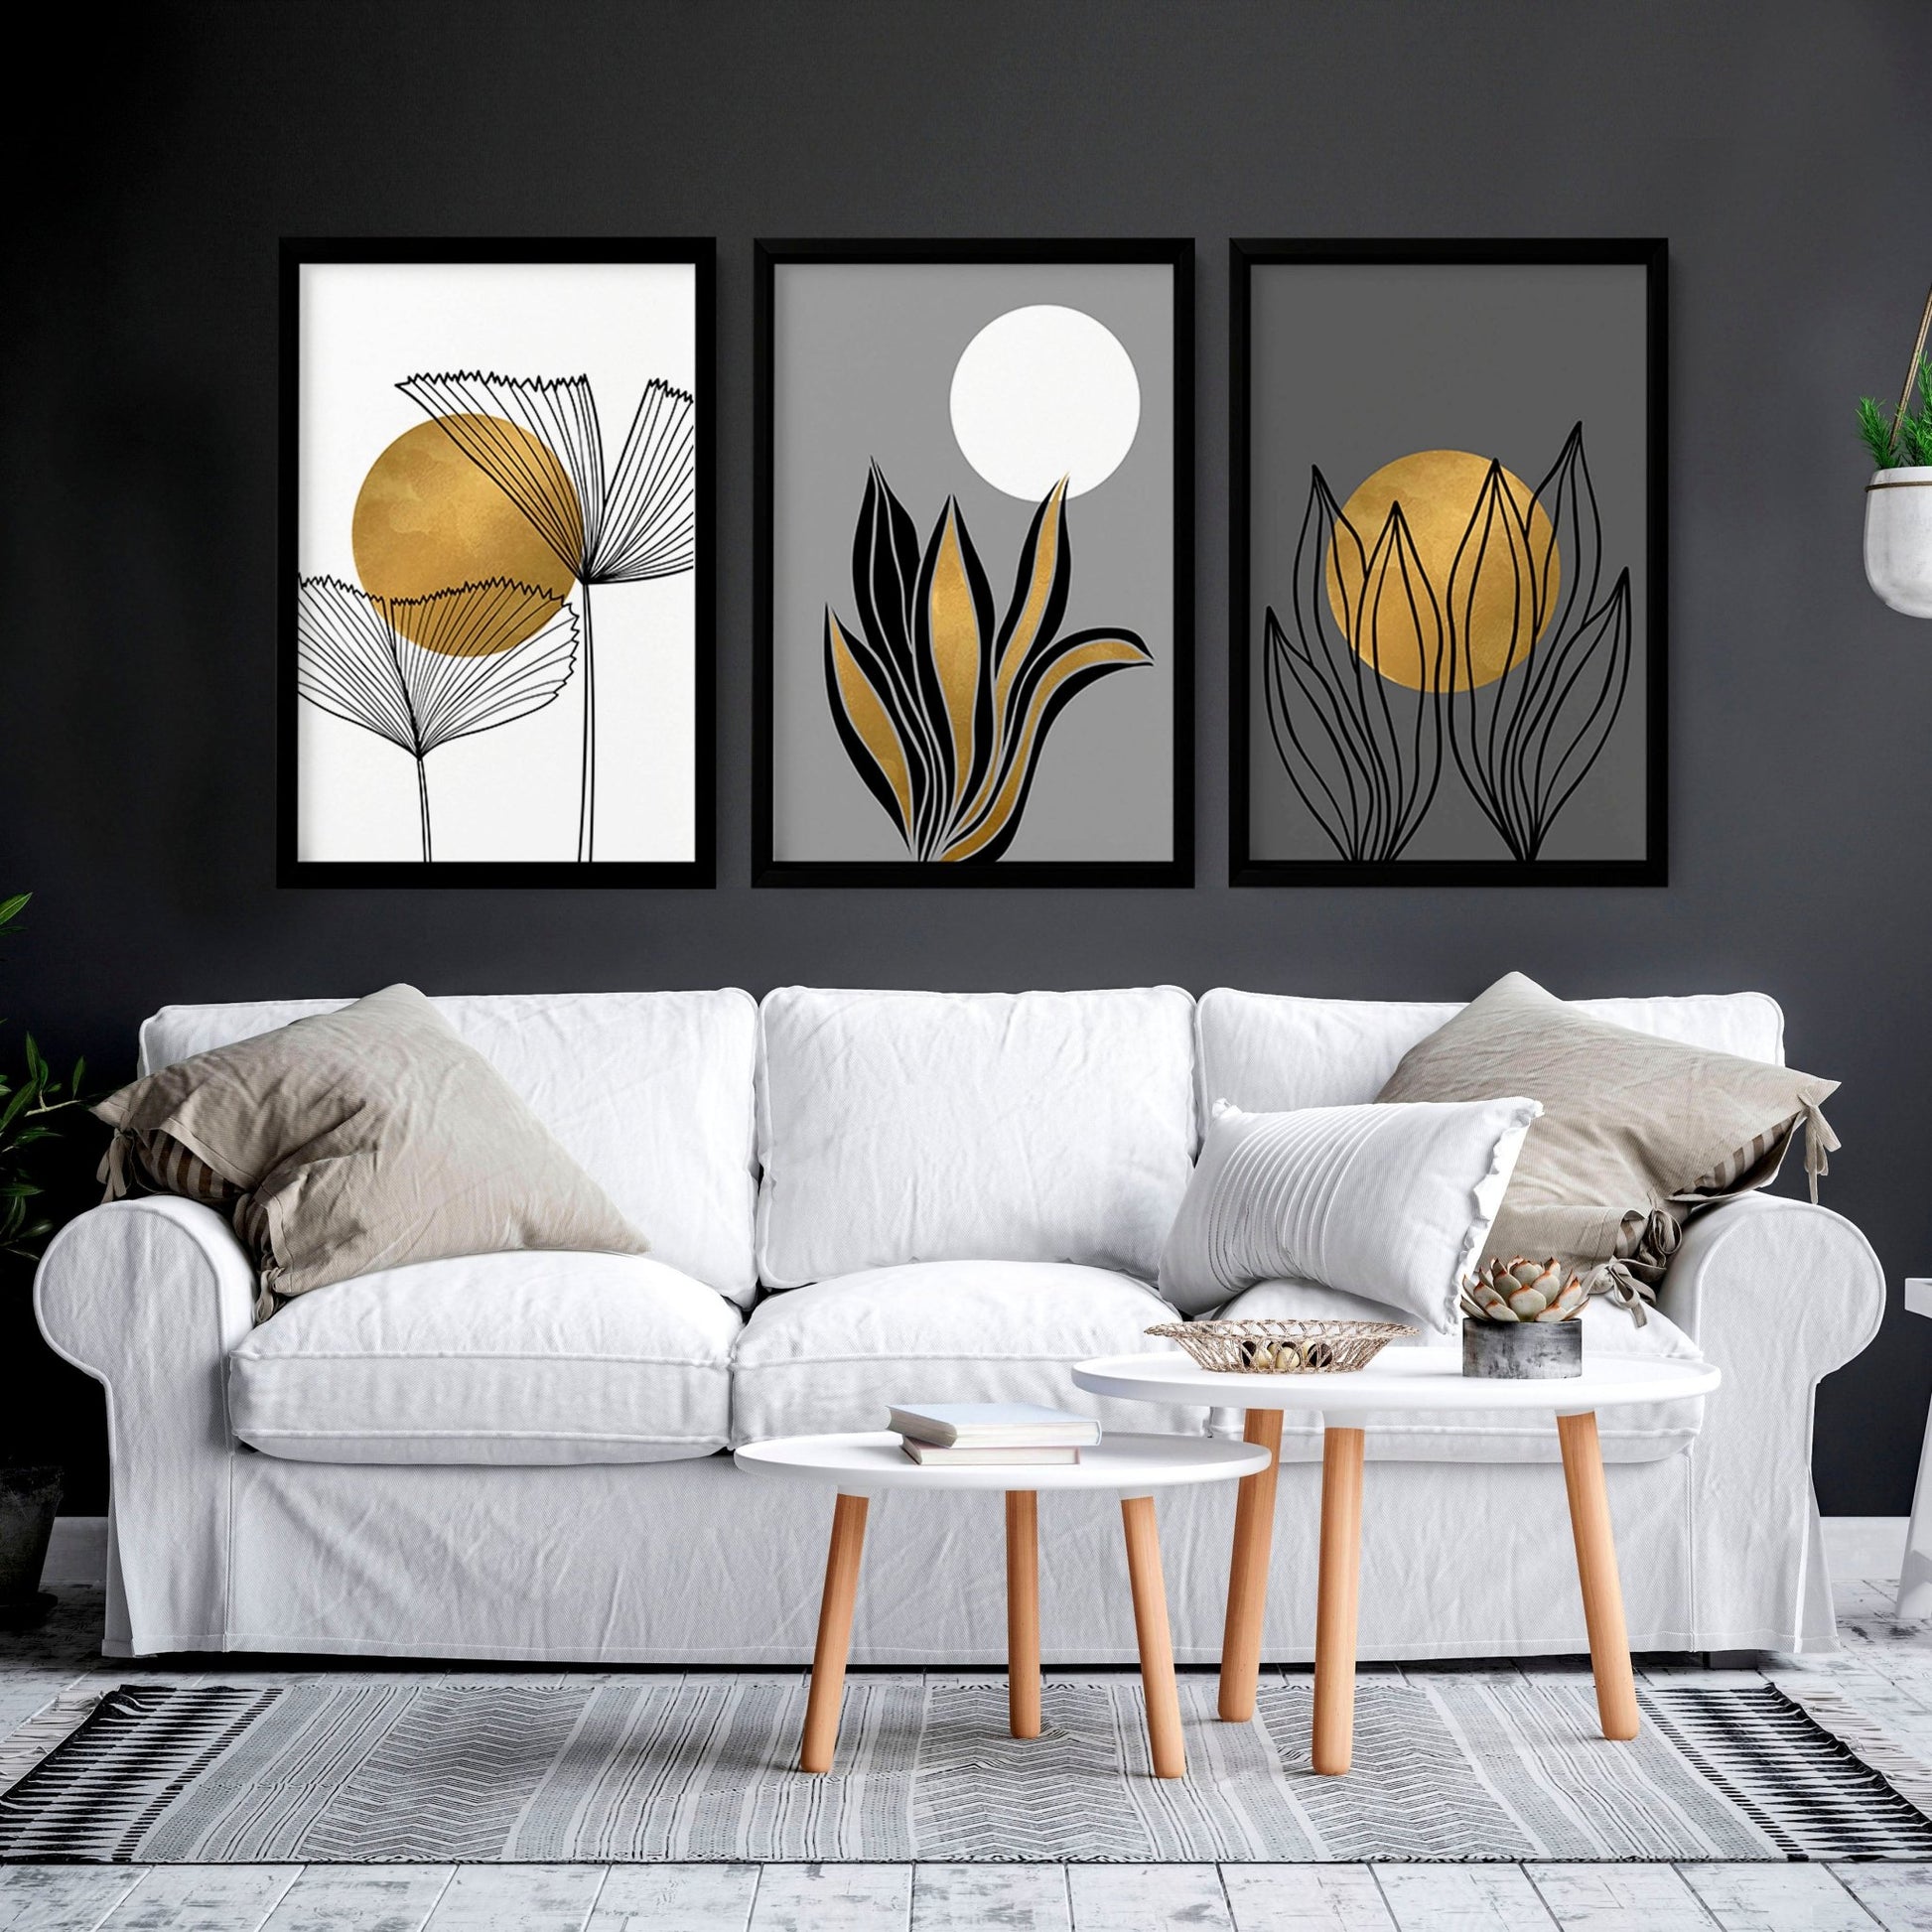 Wall decor ideas for hallway | set of 3 wall art prints - About Wall Art